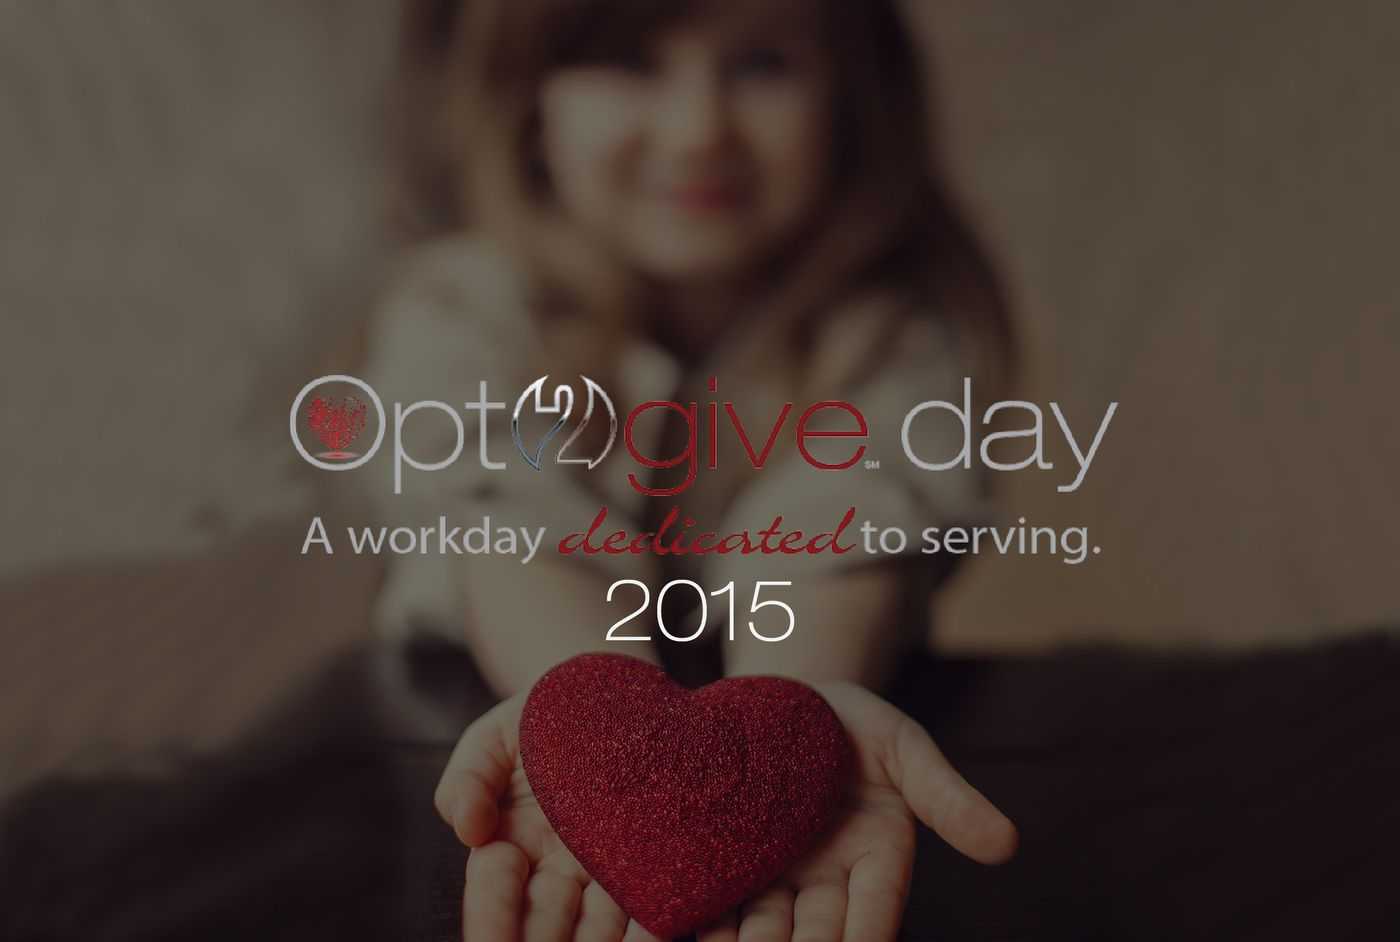 Our Atlanta Team Mentors Young At-Risk Adults for Opt2give day 2015